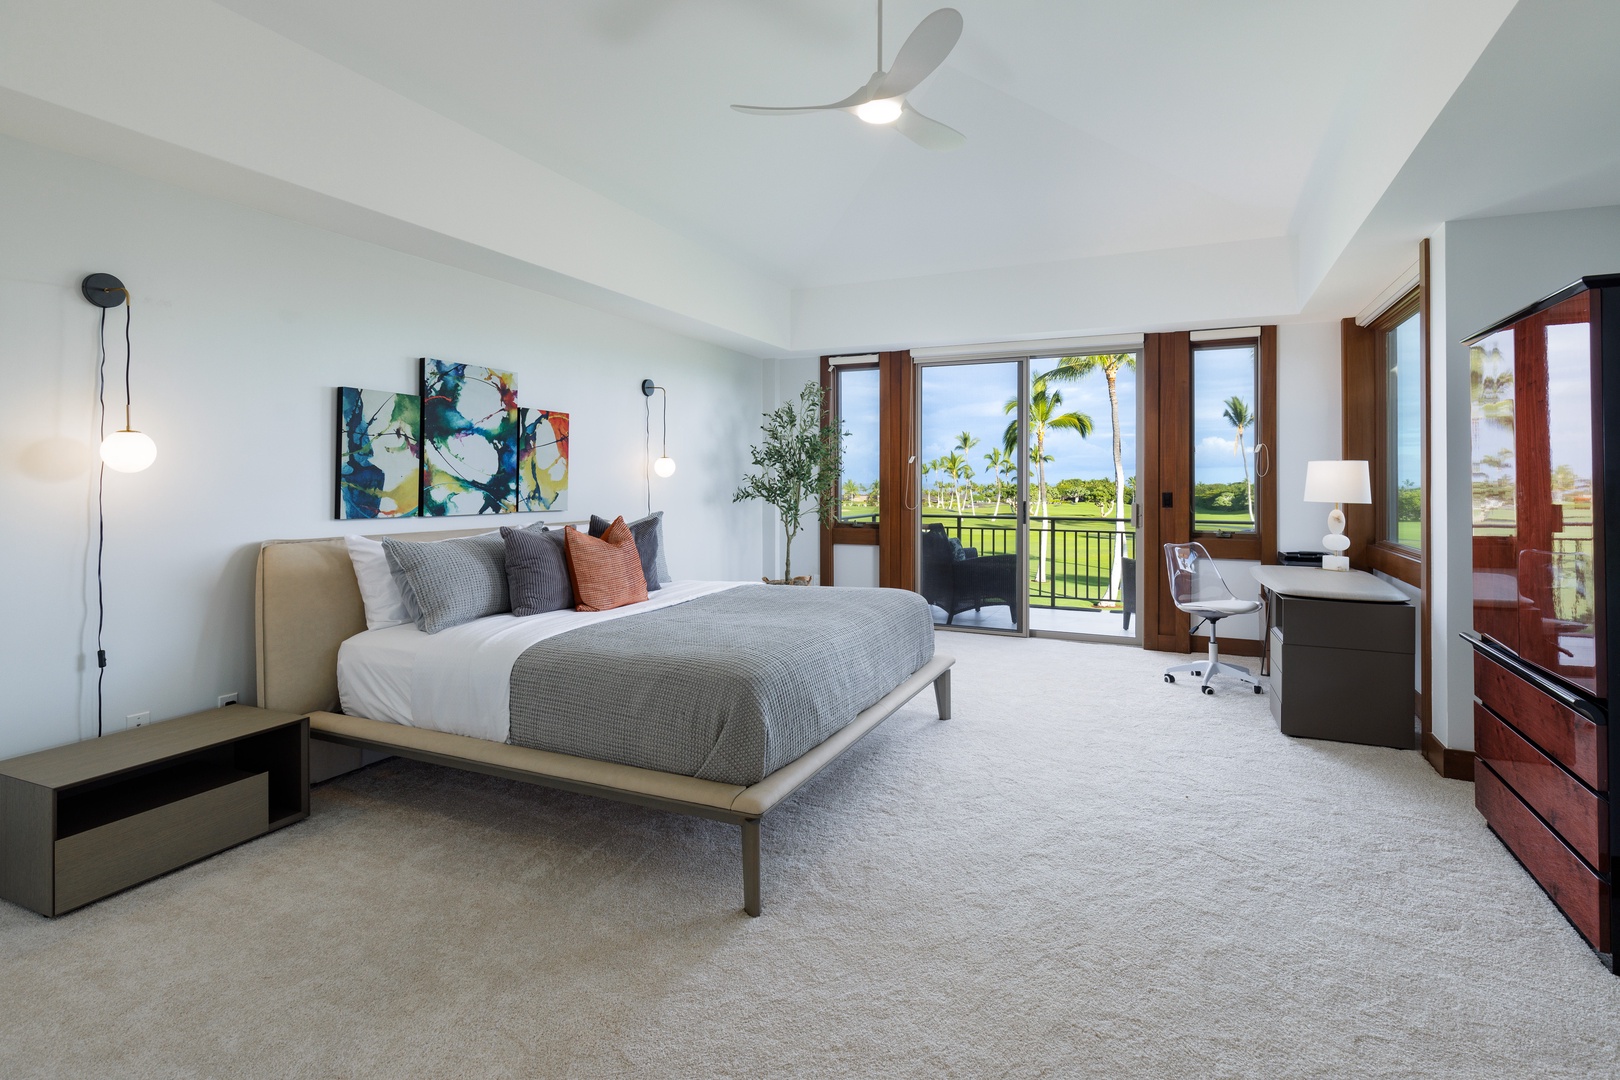 Kailua Kona Vacation Rentals, 3BD Fairways Villa (104A) at Four Seasons Resort at Hualalai - Wake up to the sound of gentle breeze every morning while enjoying your morning coffee on the private lanai.